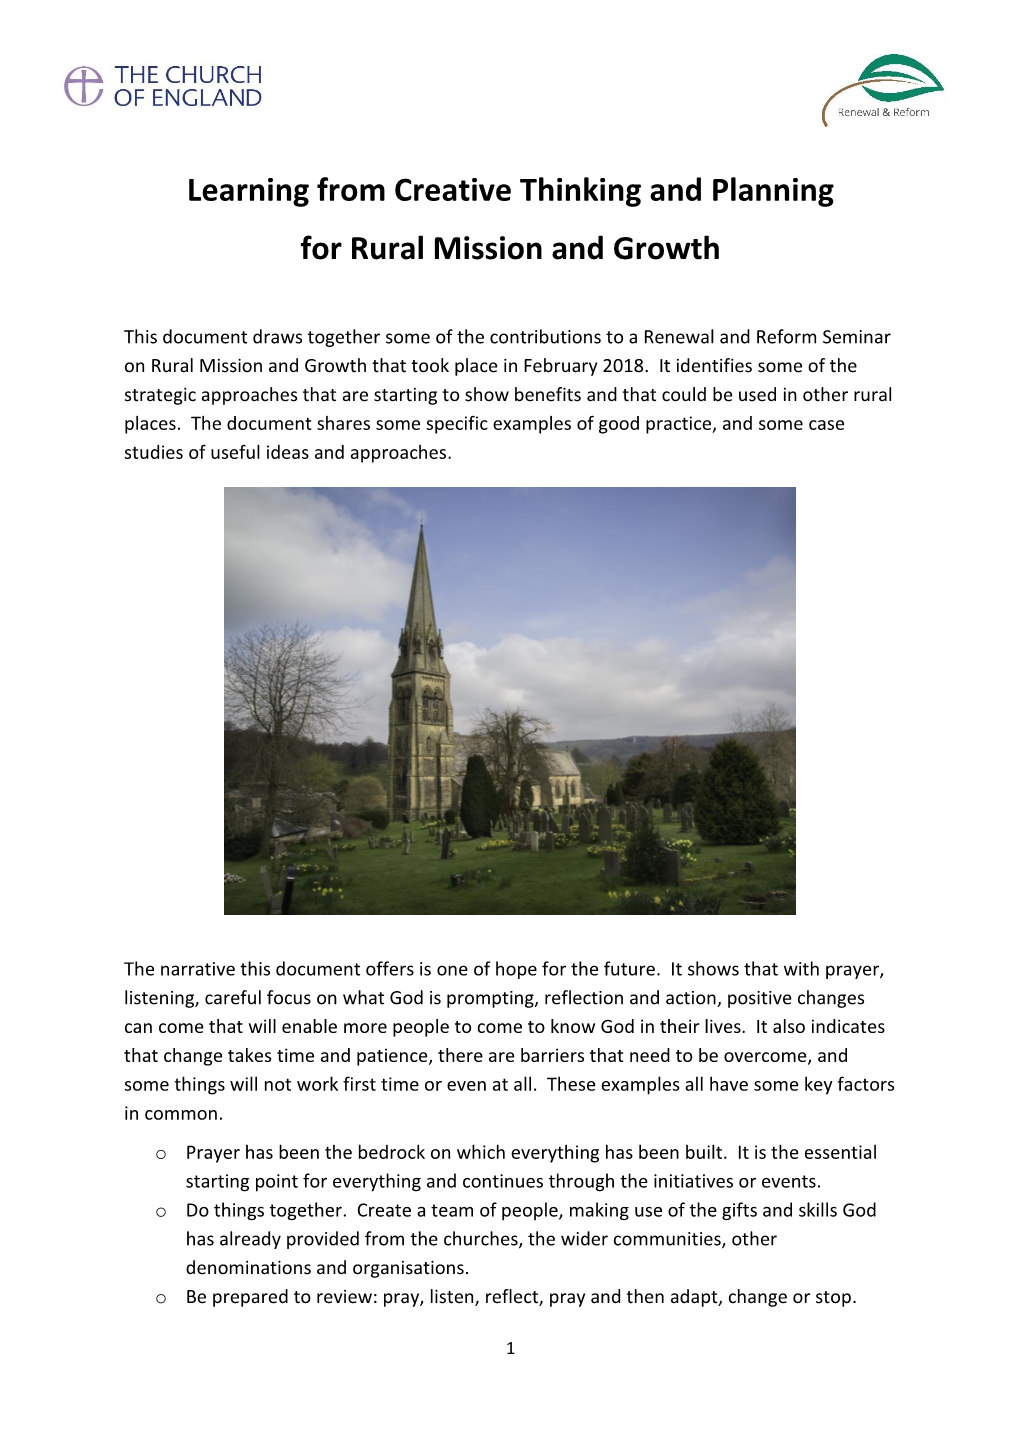 Learning from Creative Thinking and Planning for Rural Mission and Growth